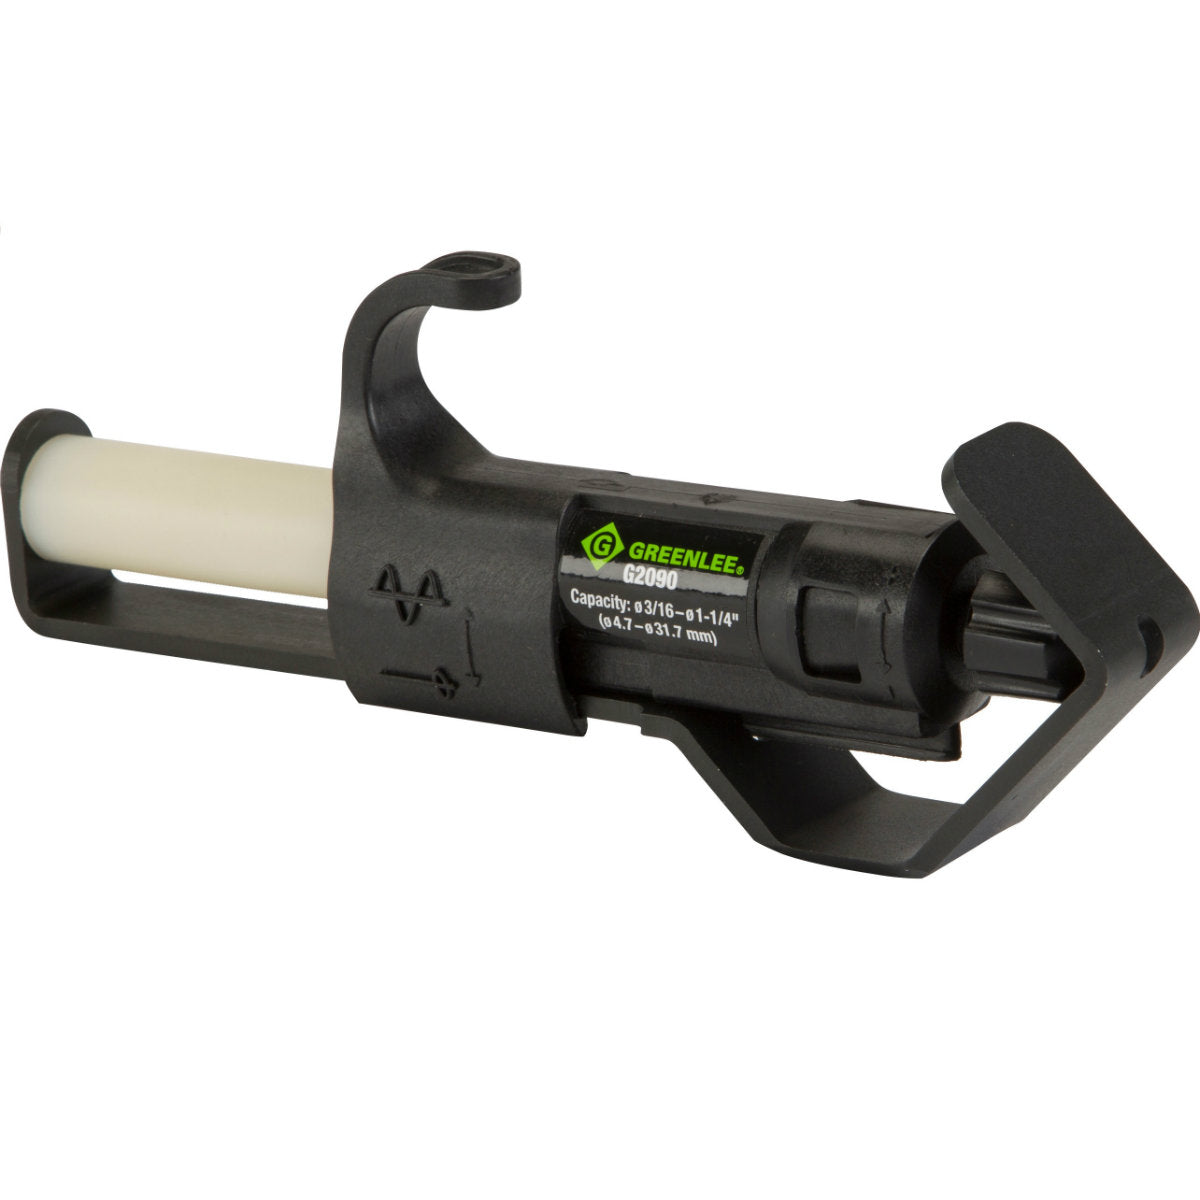 Greenlee G2090 Adjustable Cable Stripping Tool